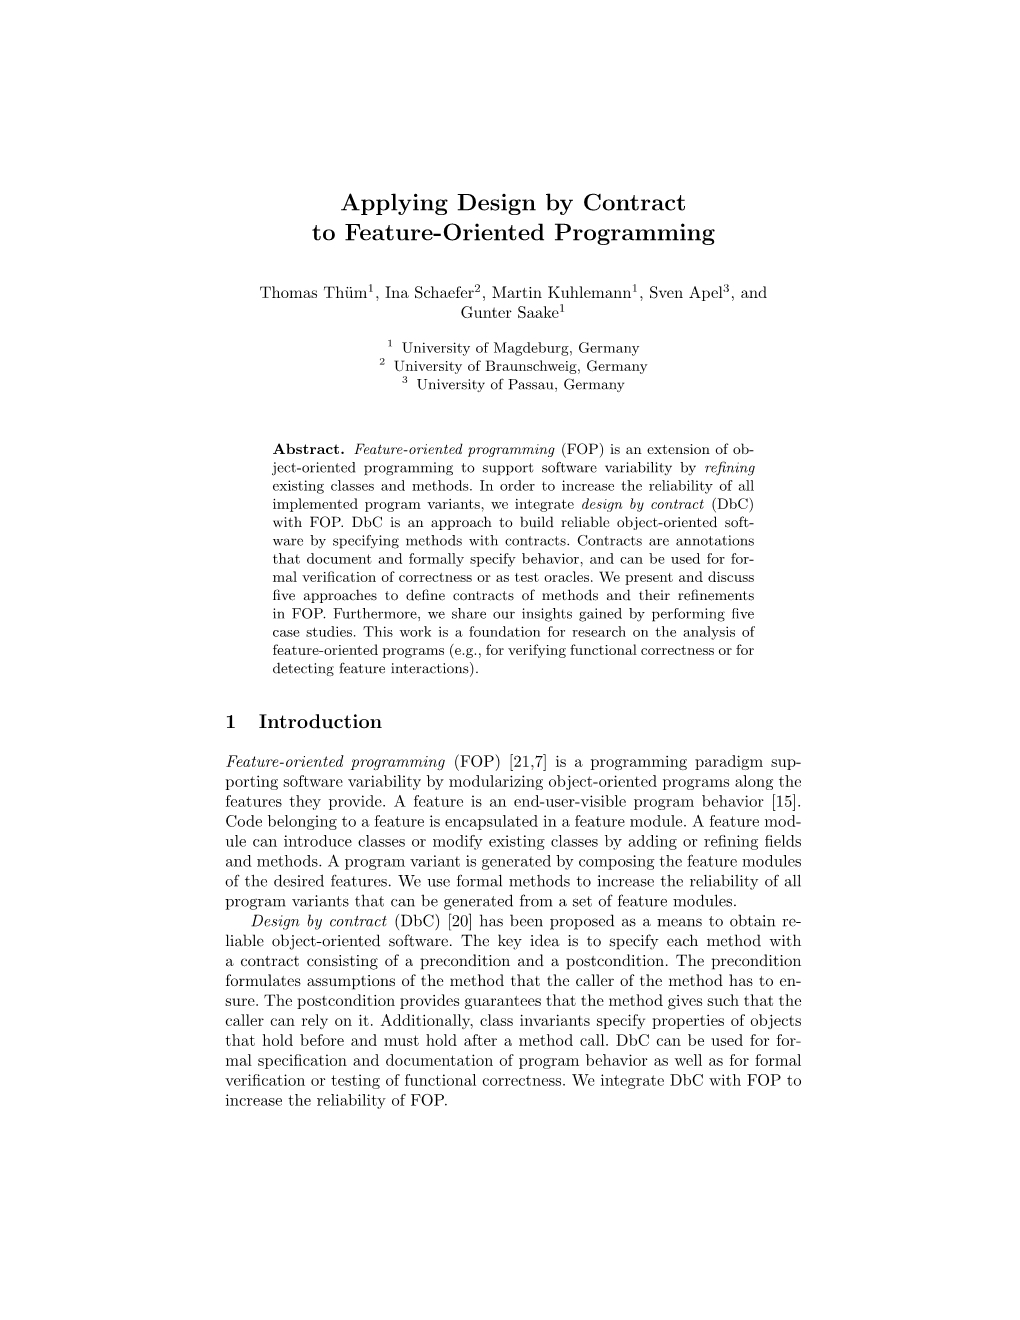 Applying Design by Contract to Feature-Oriented Programming